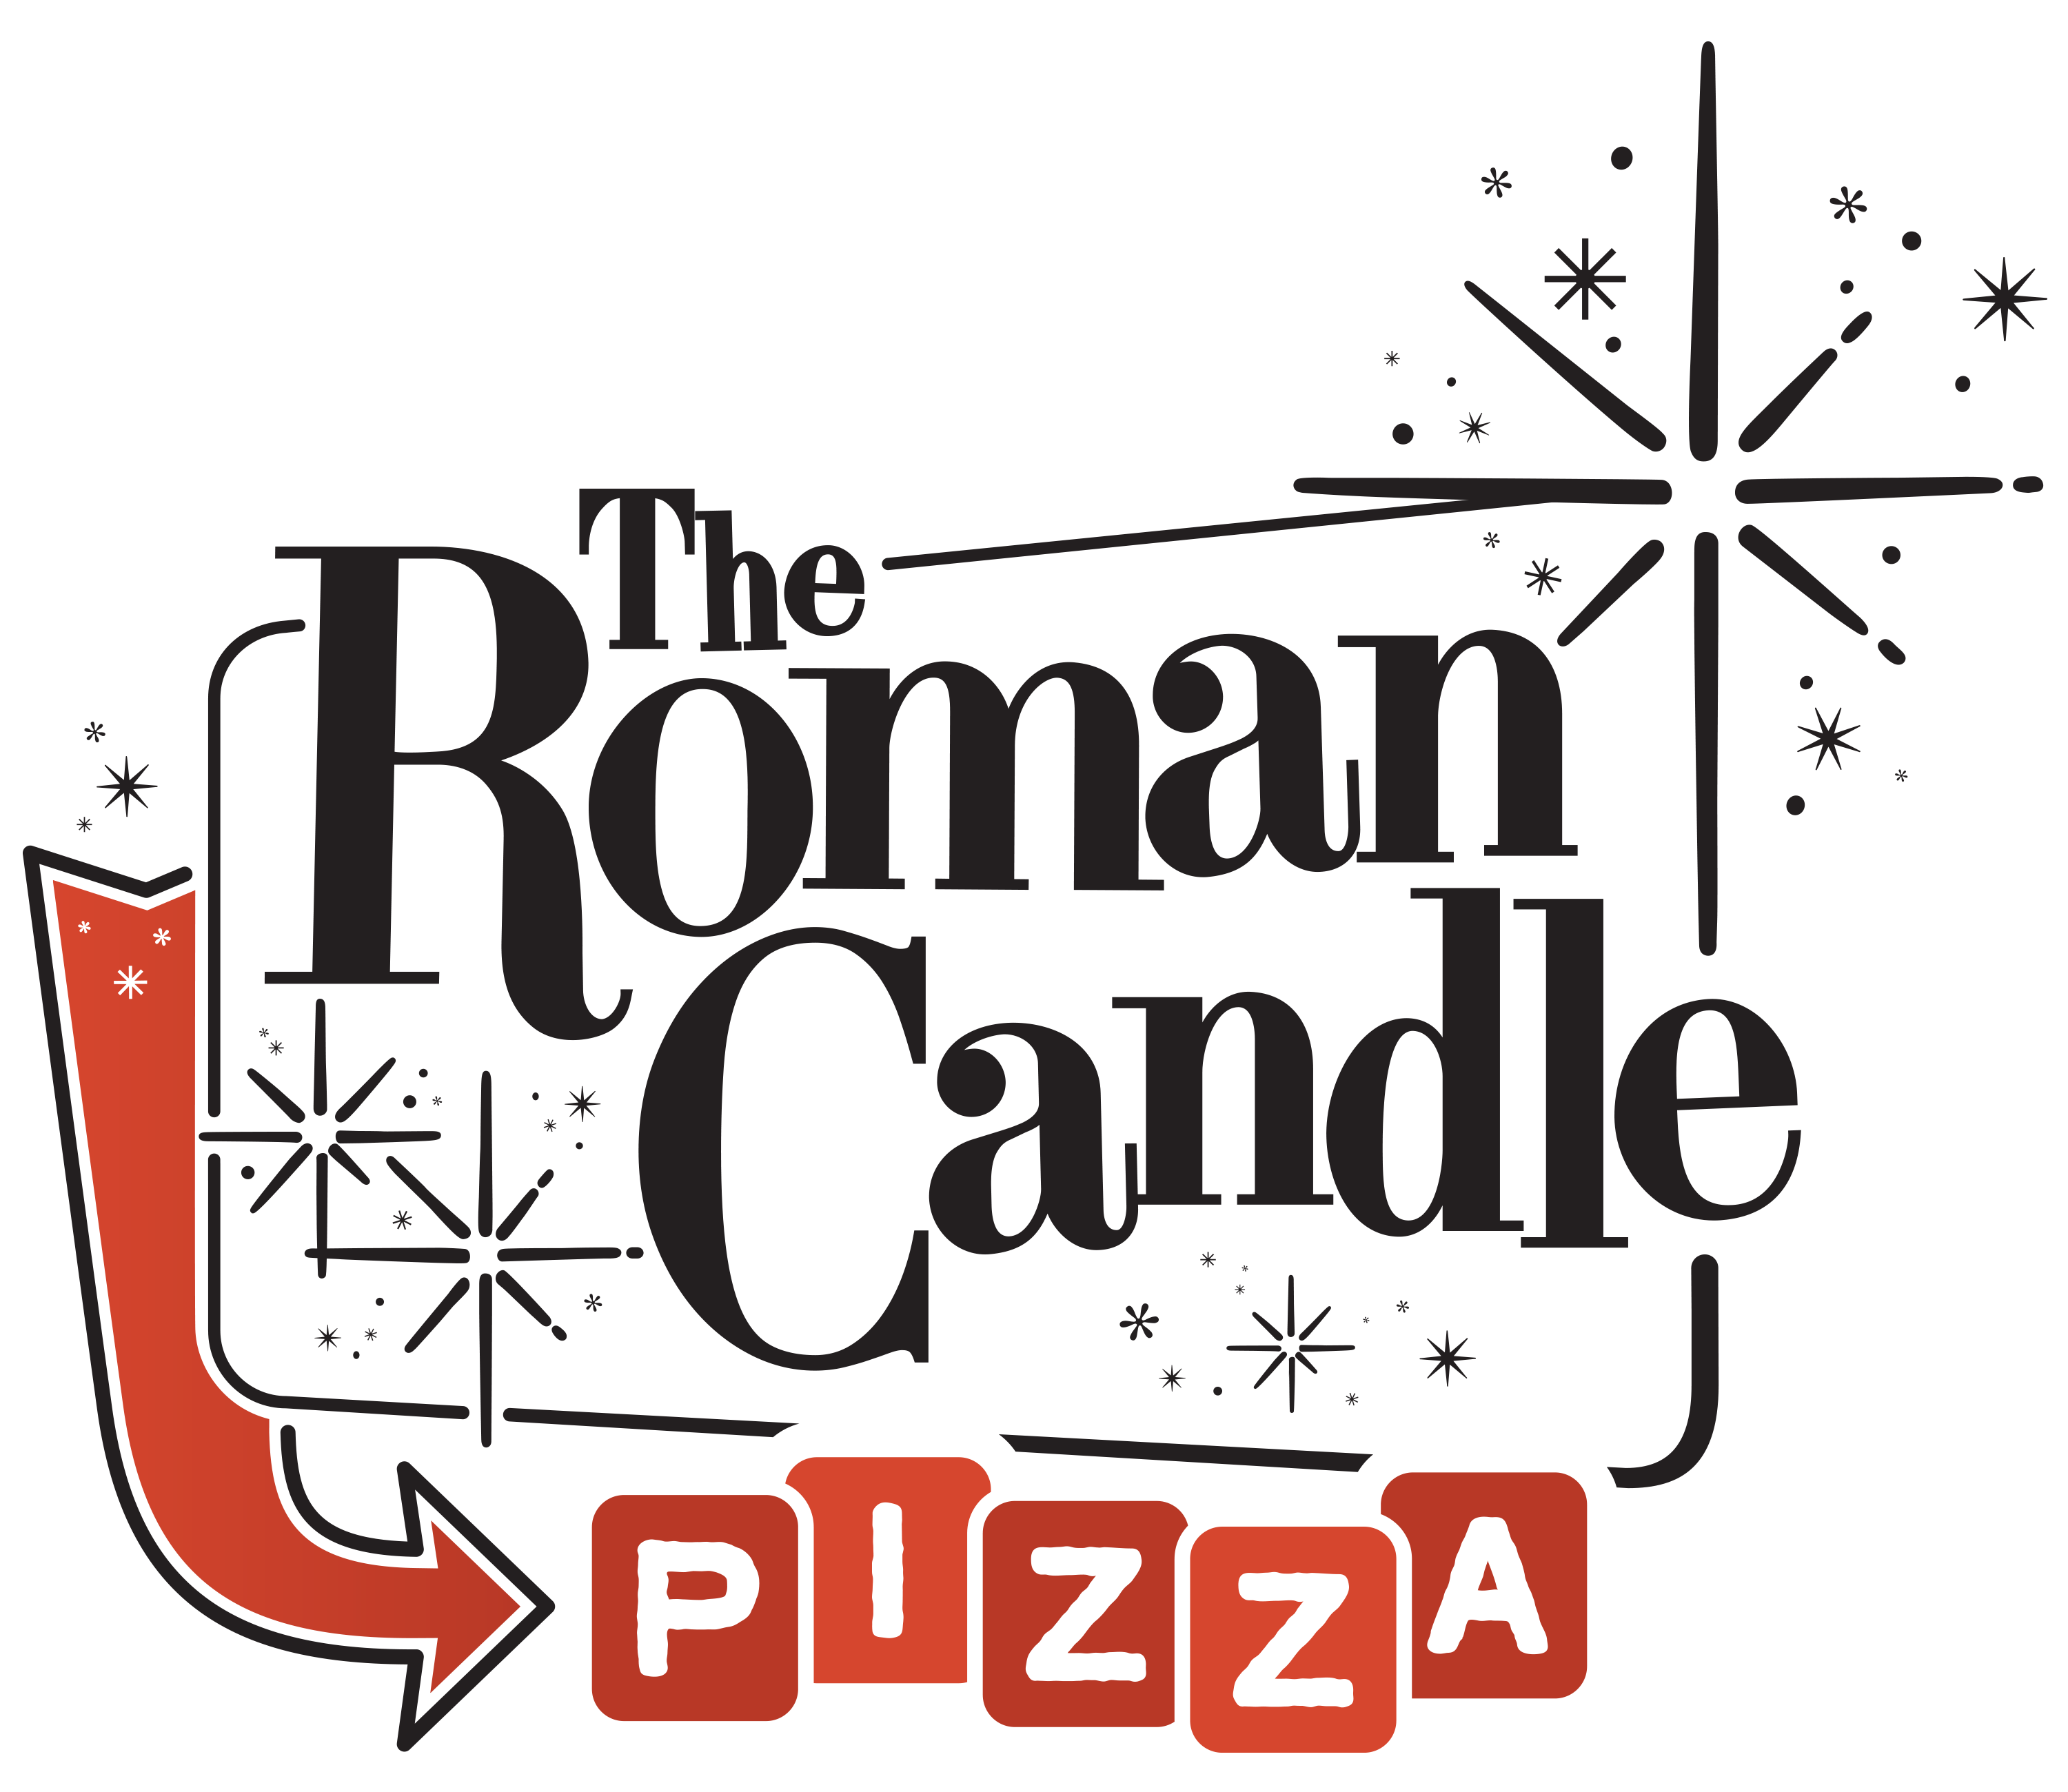 The Roman Candle Pizzeria